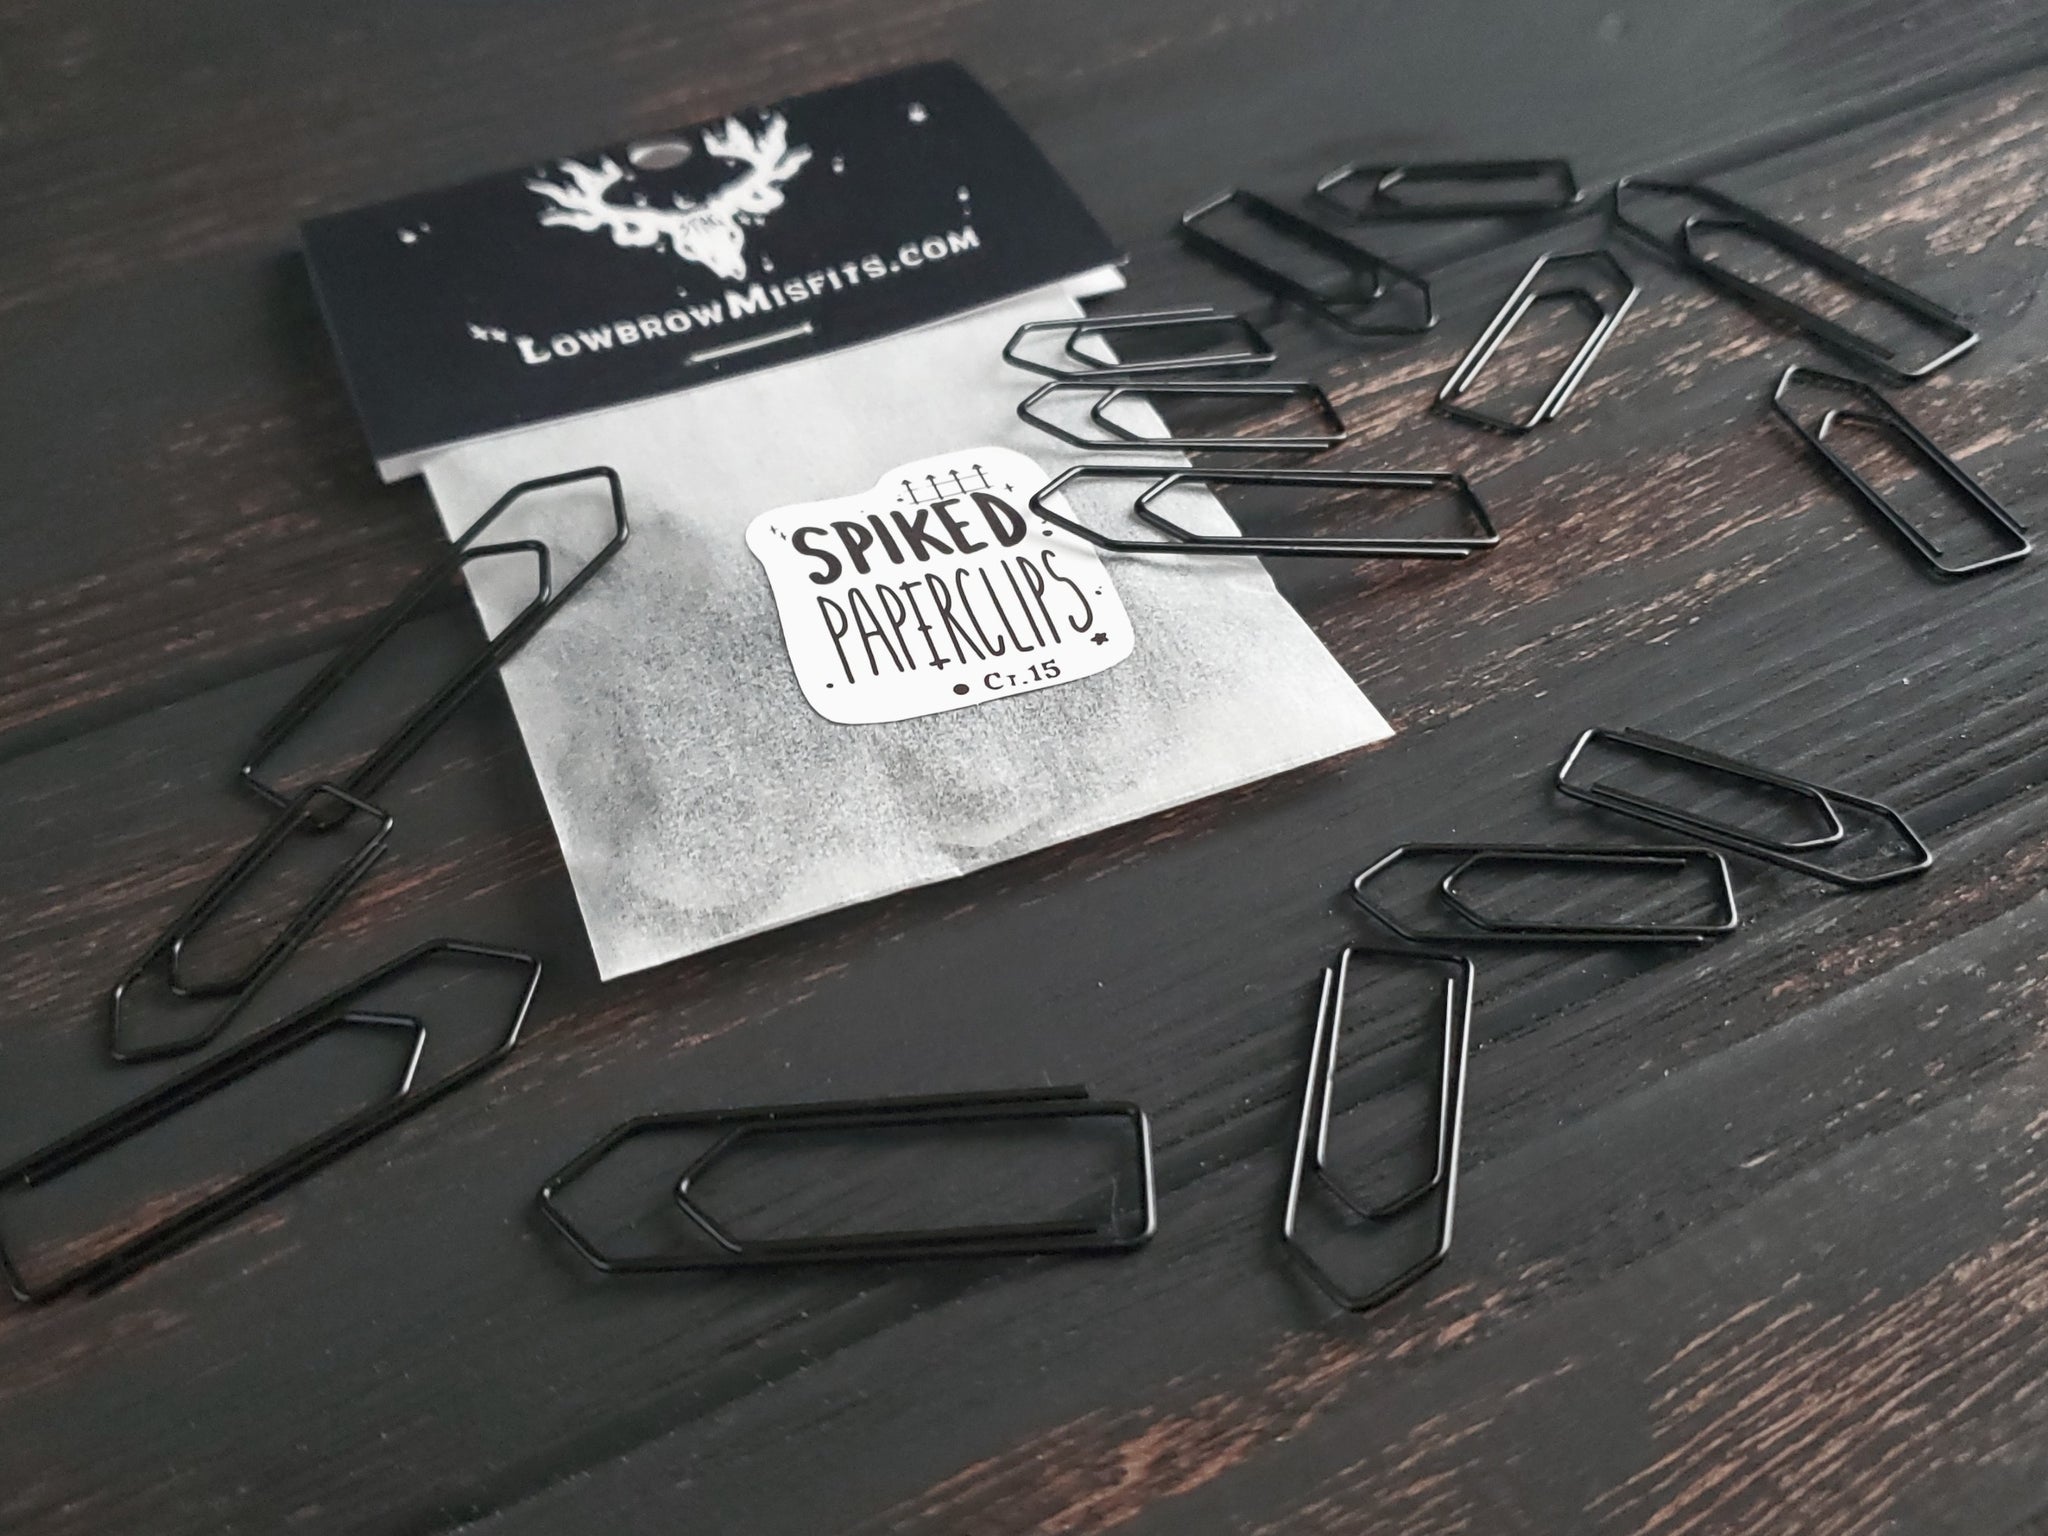 Spiked paperclips